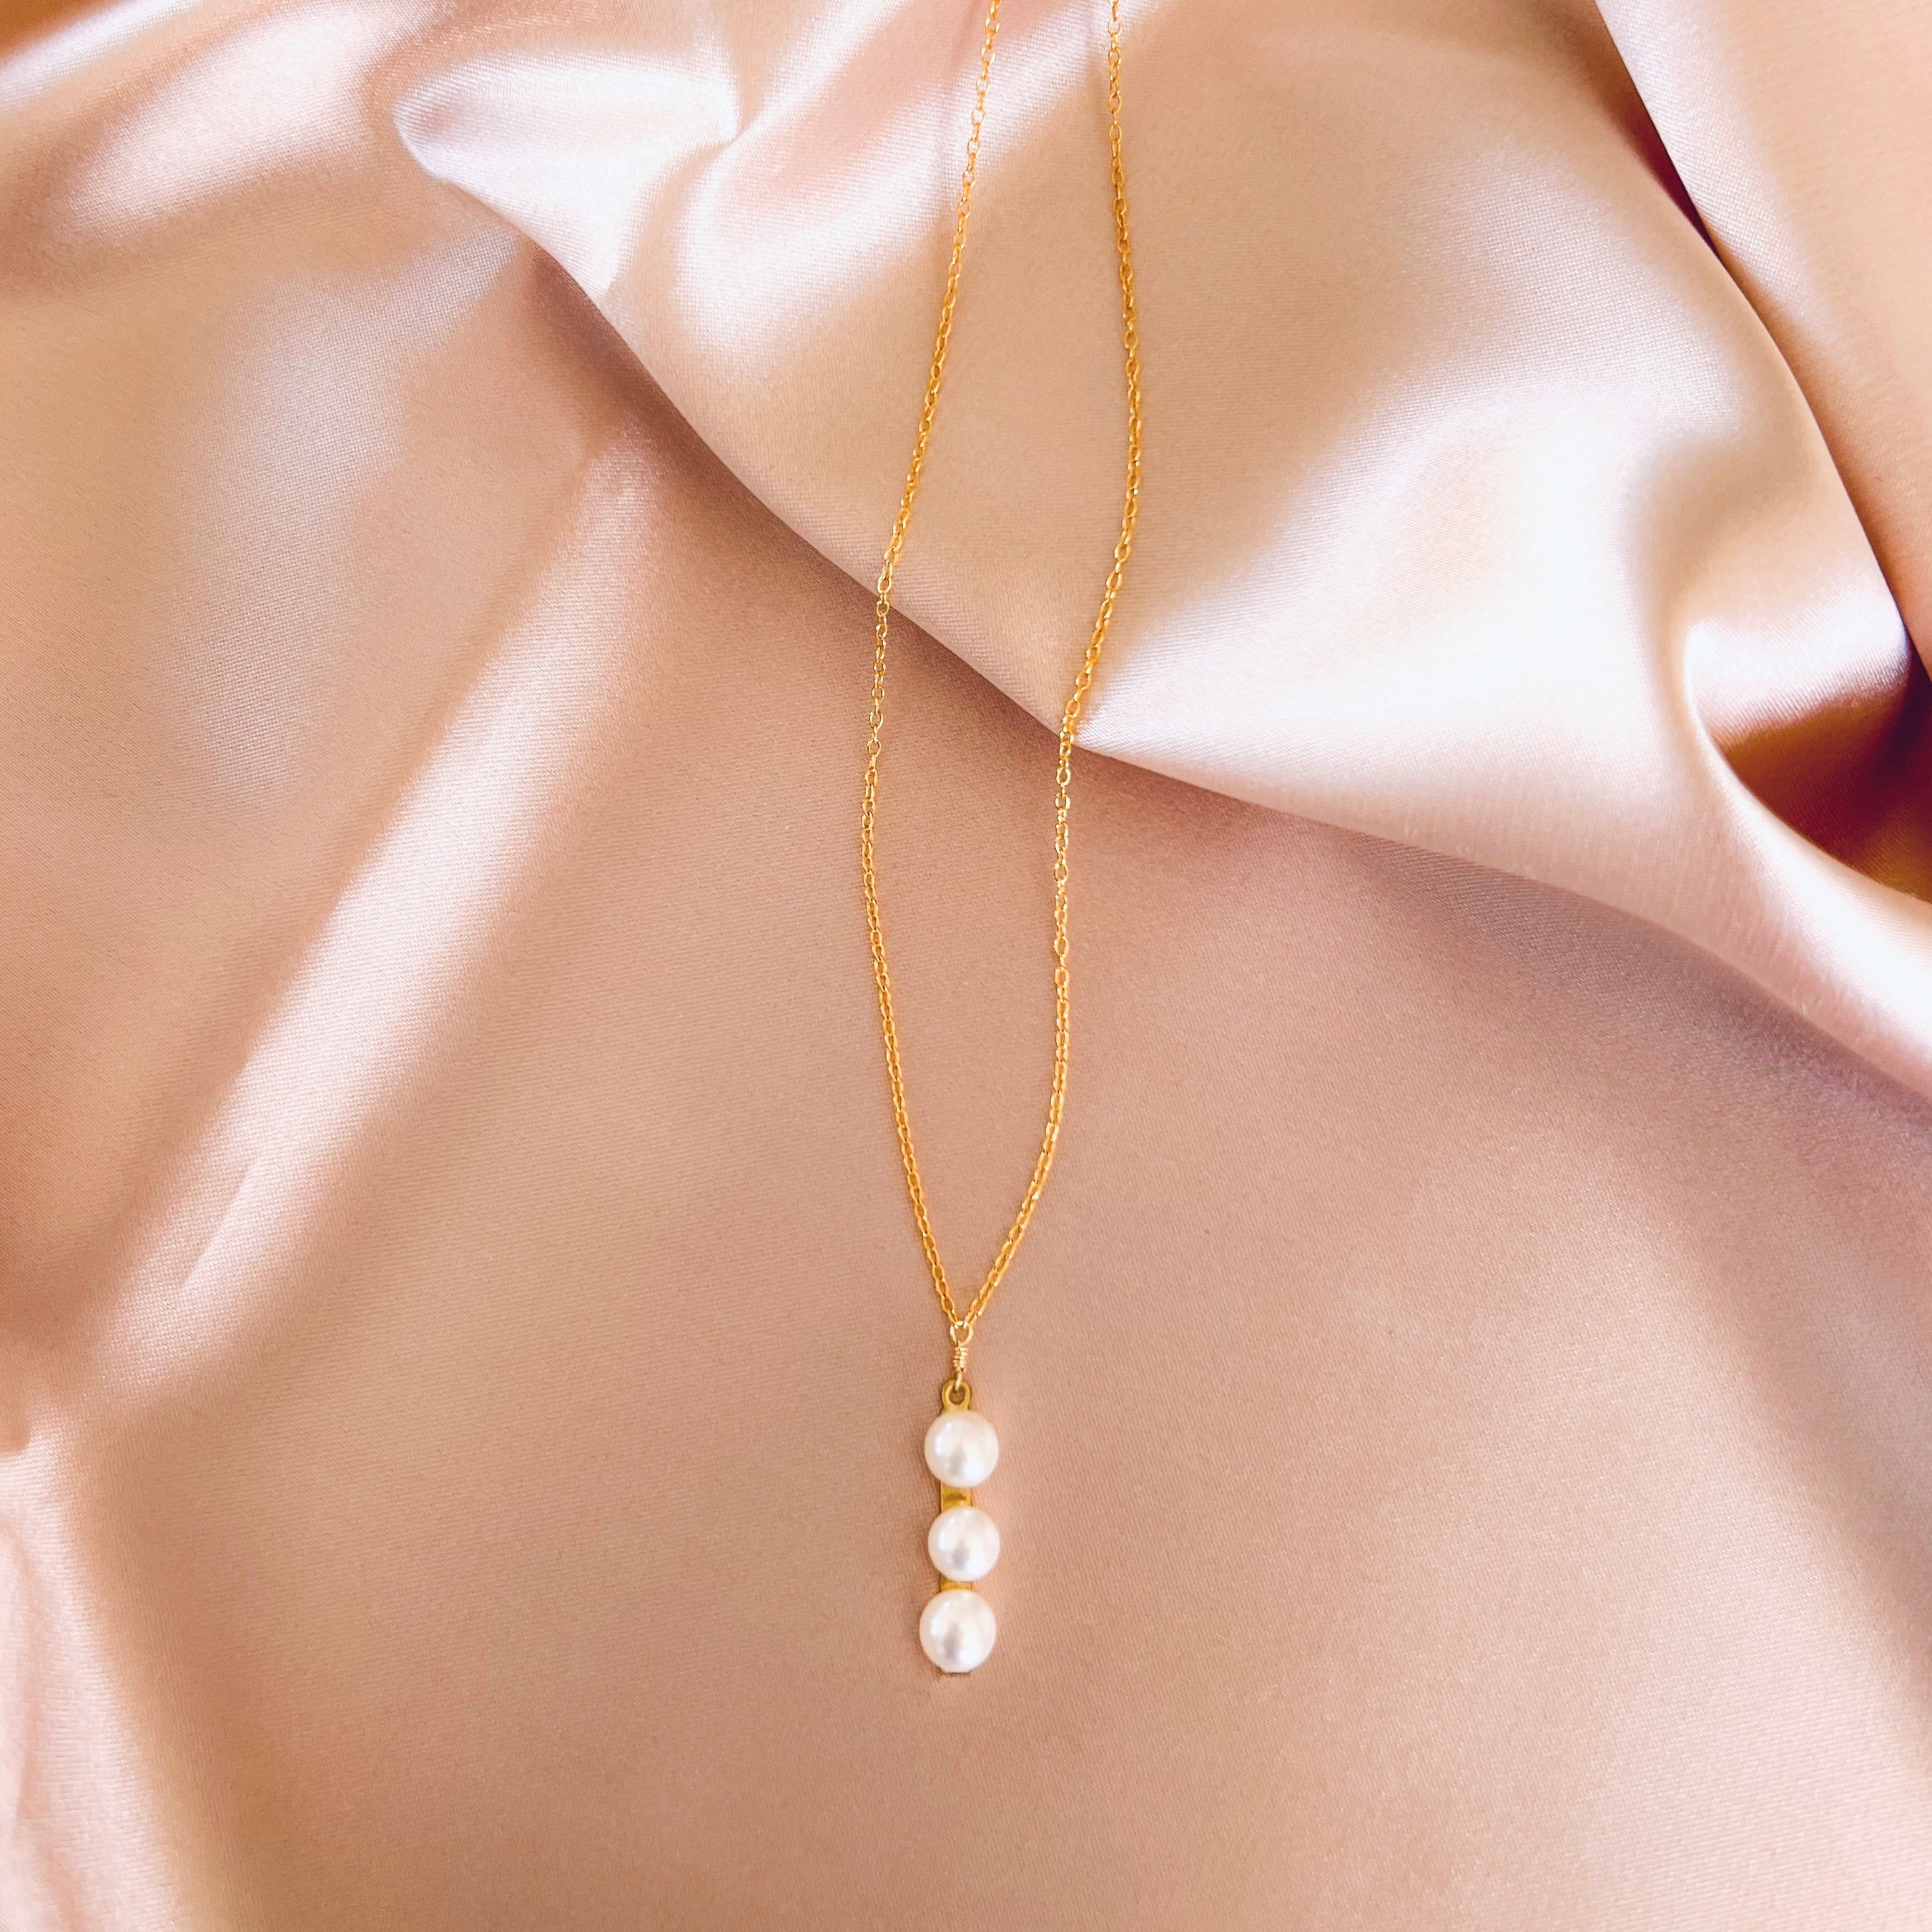 Necklace featuring three freshwater pearls on a slim gold bar, attached to a delicate 14k gold-plated chain